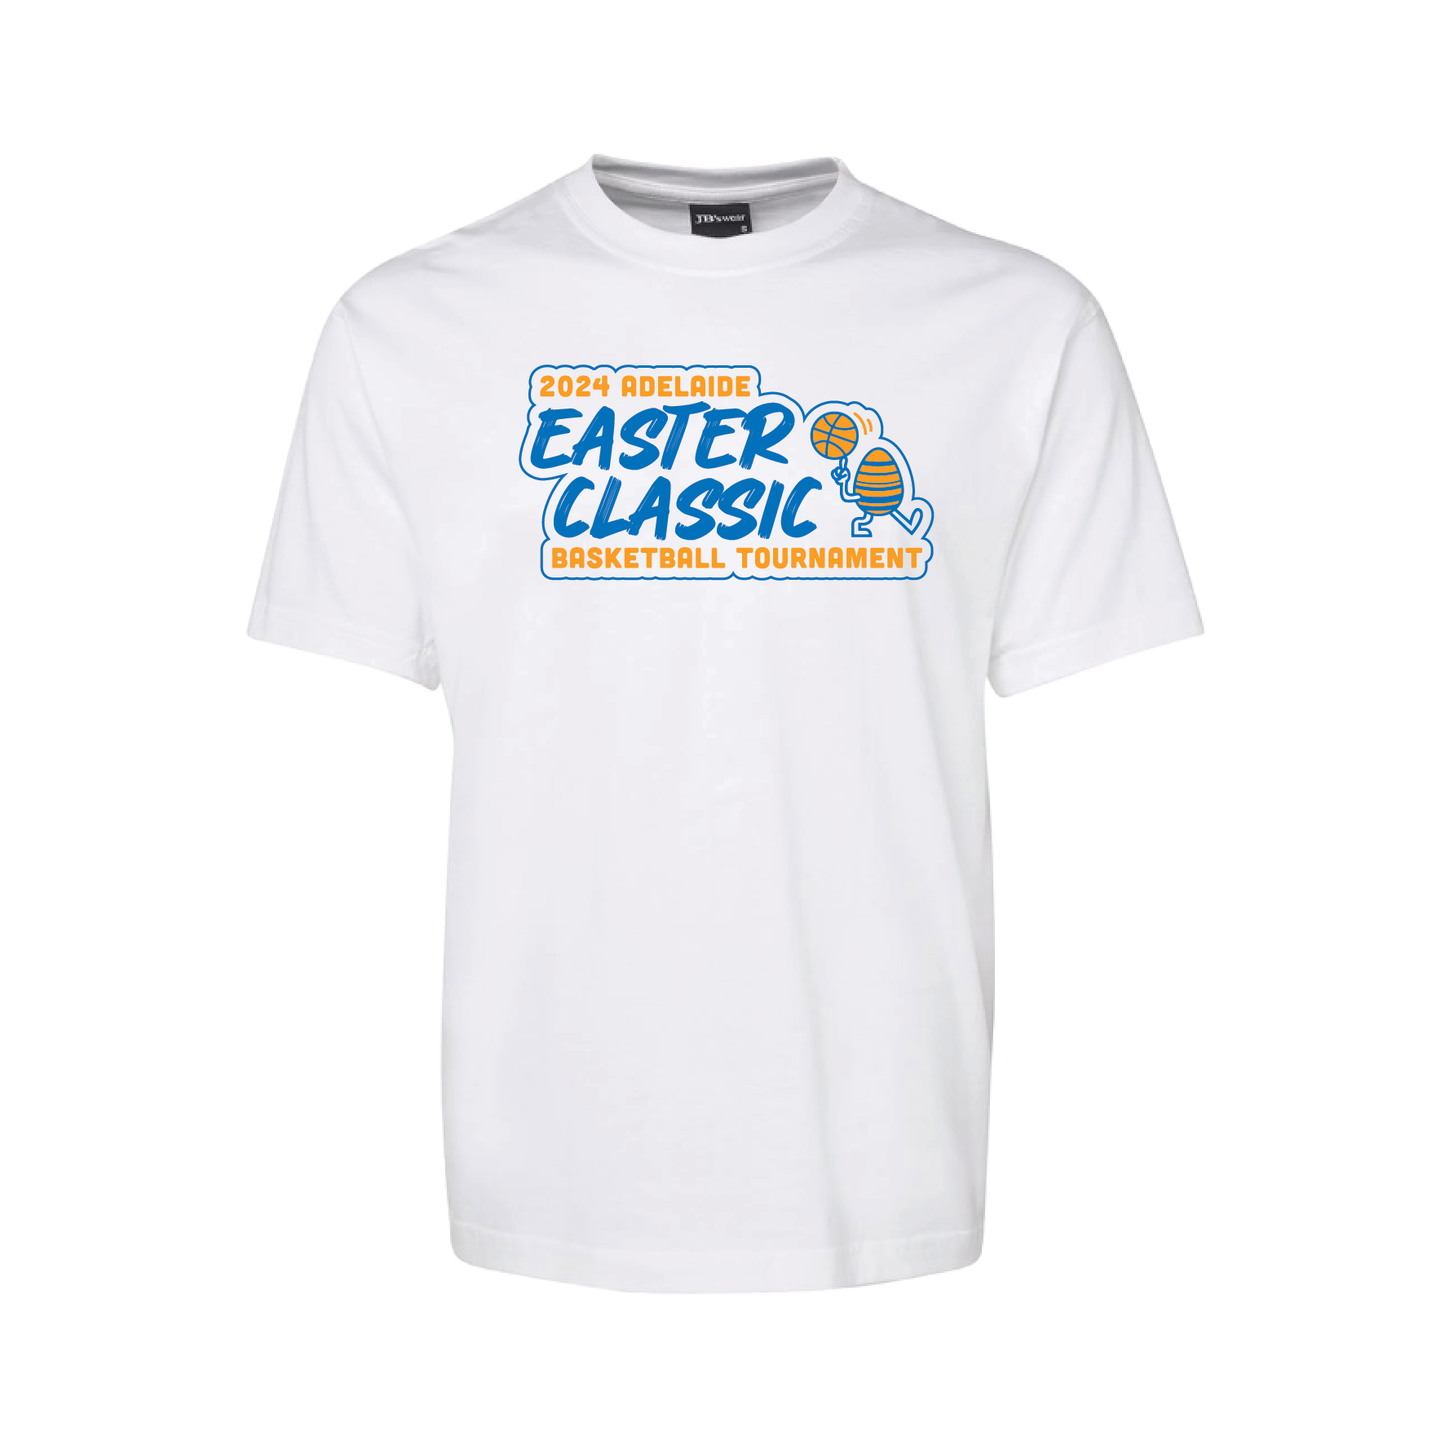 EASTER CLASSIC T-SHIRT WHITE SHORT SLEEVE TEAM AND INDIVIDUAL PLAYER NAMES ON BACK  (MIN QTY 8+)